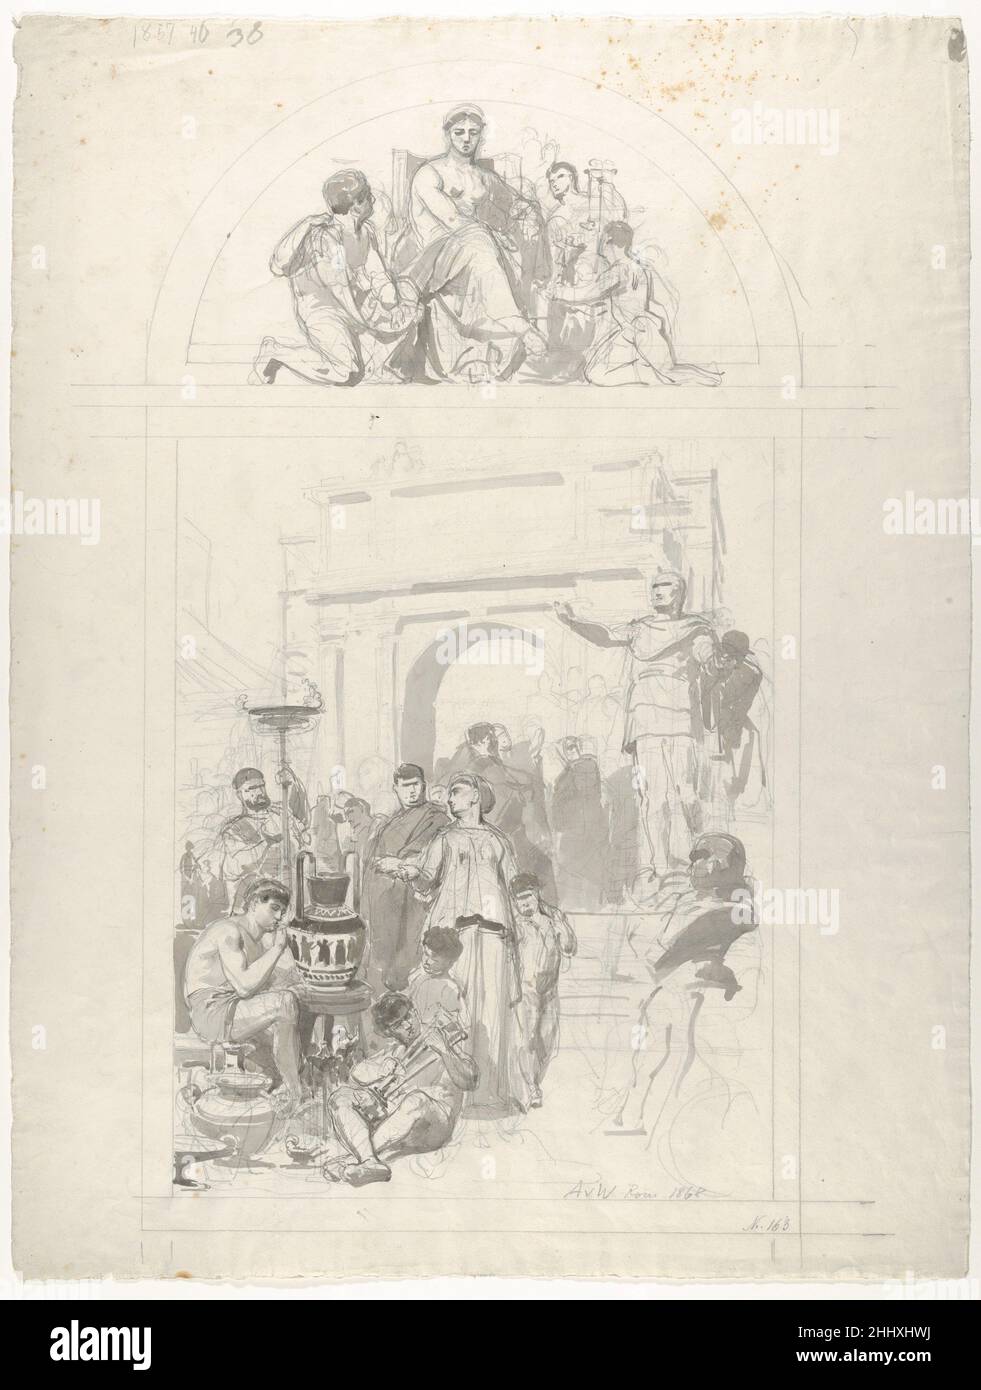 Greek Vase-Painting (Design for a Wall Decoration) 1868 Anton von Werner. Greek Vase-Painting (Design for a Wall Decoration)  629075 Stock Photo